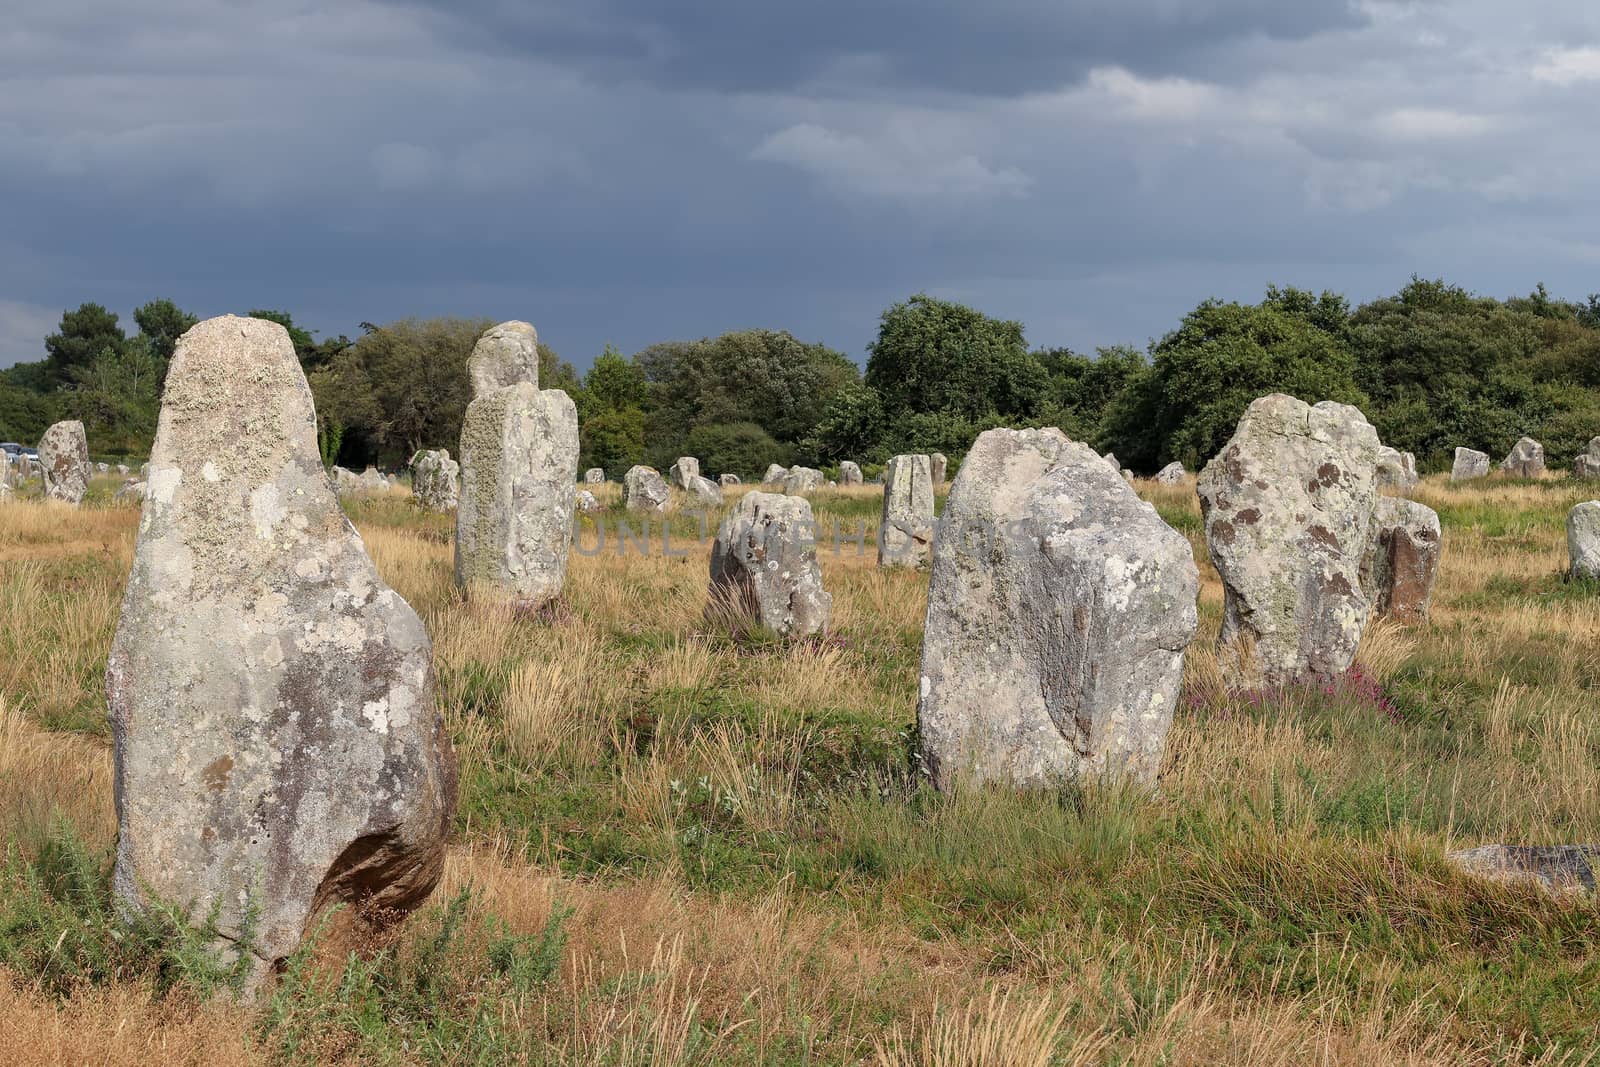 Alignements du Menec - rows of Menhirs - standing stones - the largest megalithic site in the world, Carnac, Brittany, France
